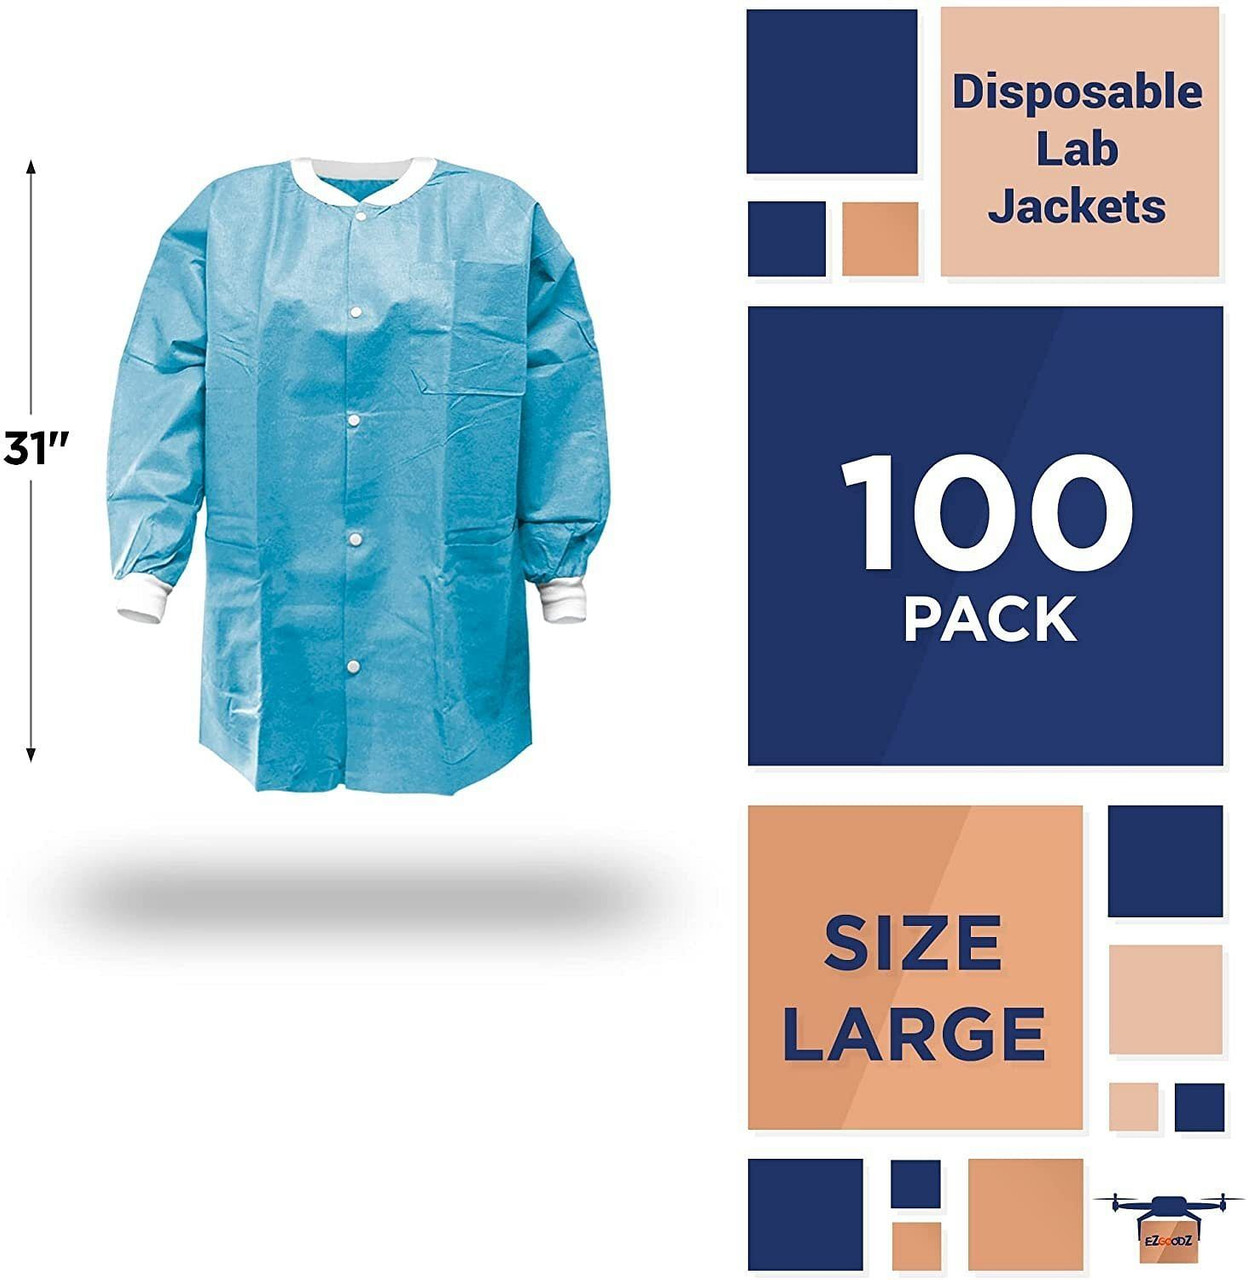 Disposable Lab Jackets; 33" Long. Pack of 100 Blue Hip-Length Work Gowns XX-Large. SMS 50 gsm Shirt